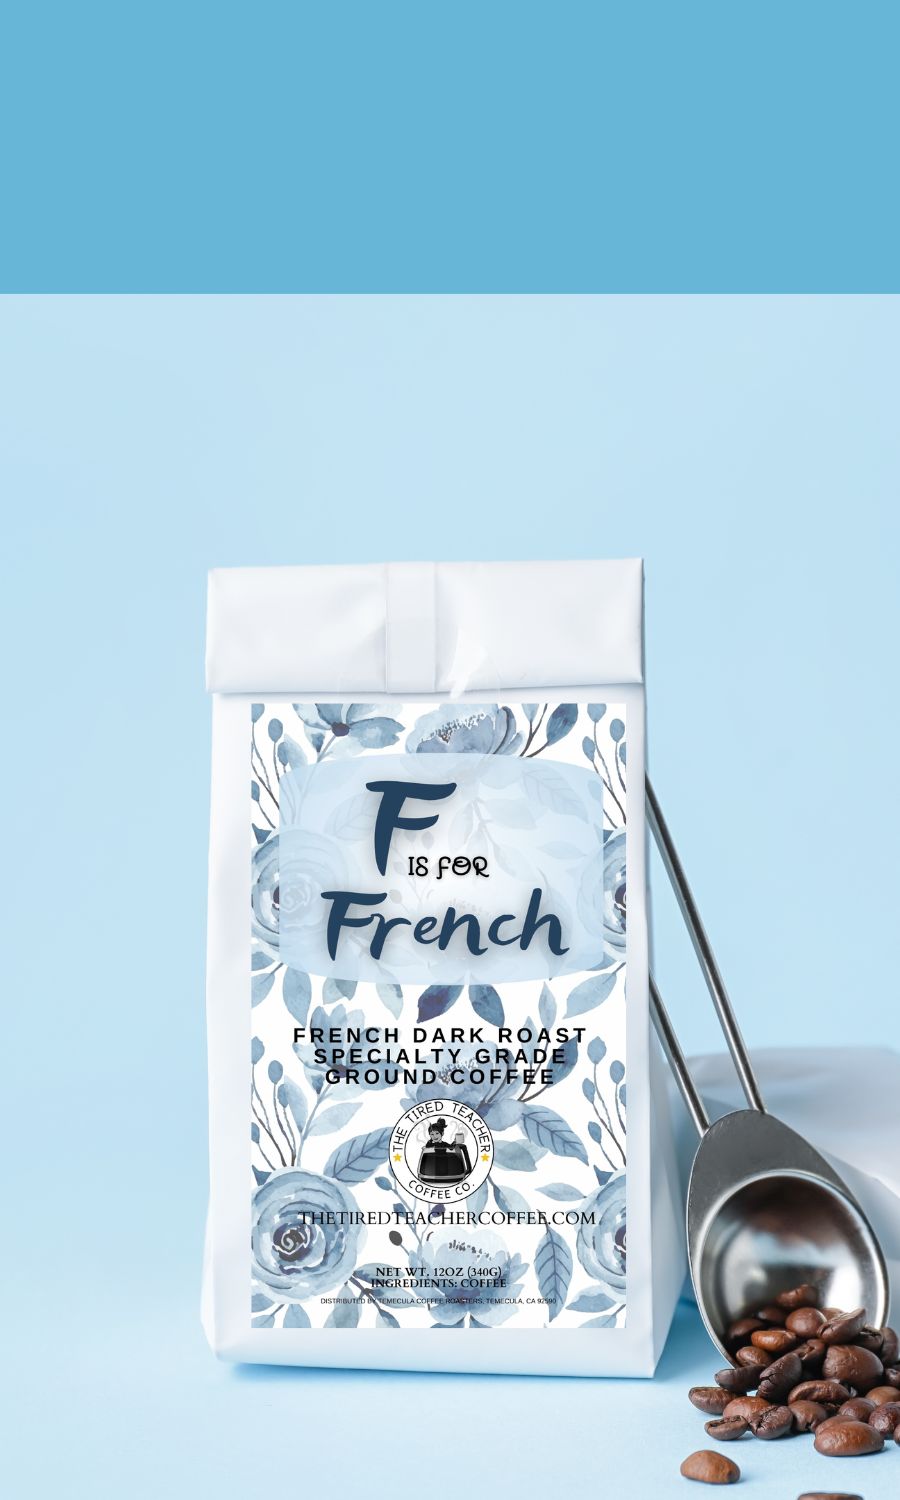 F is for French~ Dark roast